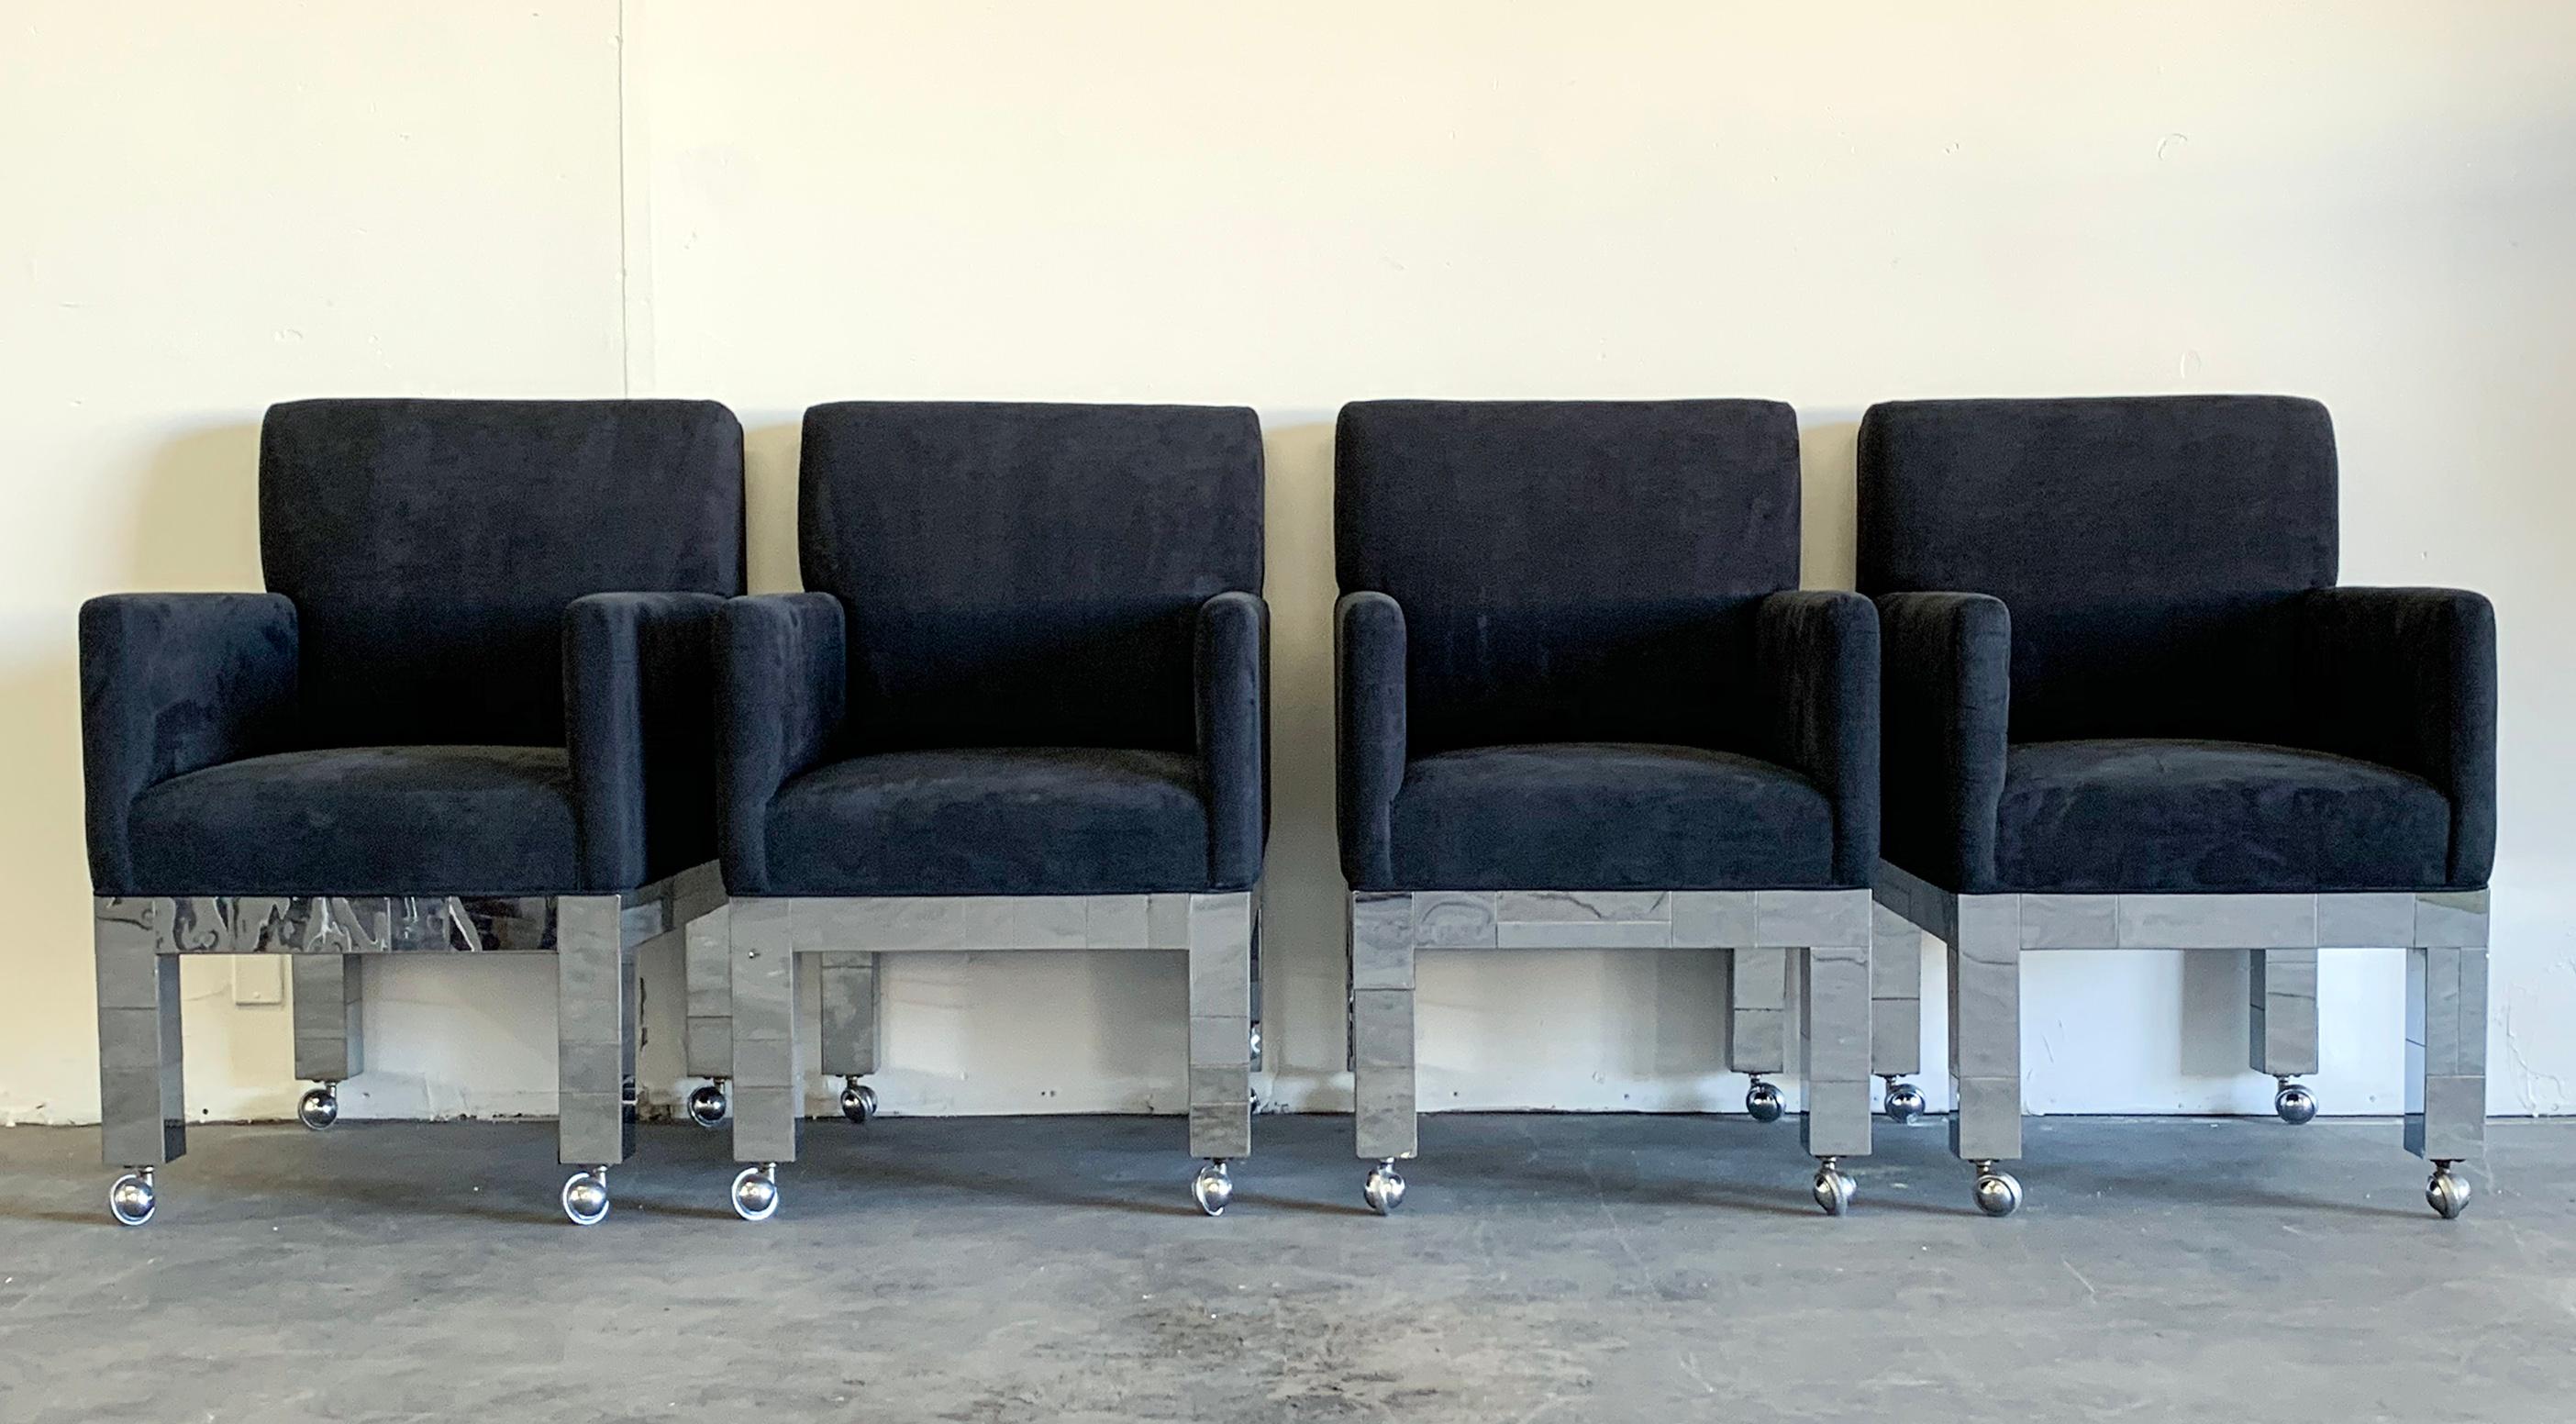 A stunning and rare set of 4 chrome cityscape chairs by Paul Evans for Directional. This matched set of PE-241 arm chairs are upholstered in a supple black matte ultrasuede and feature Evans' signature chrome patchwork  design.

These gorgeous Paul